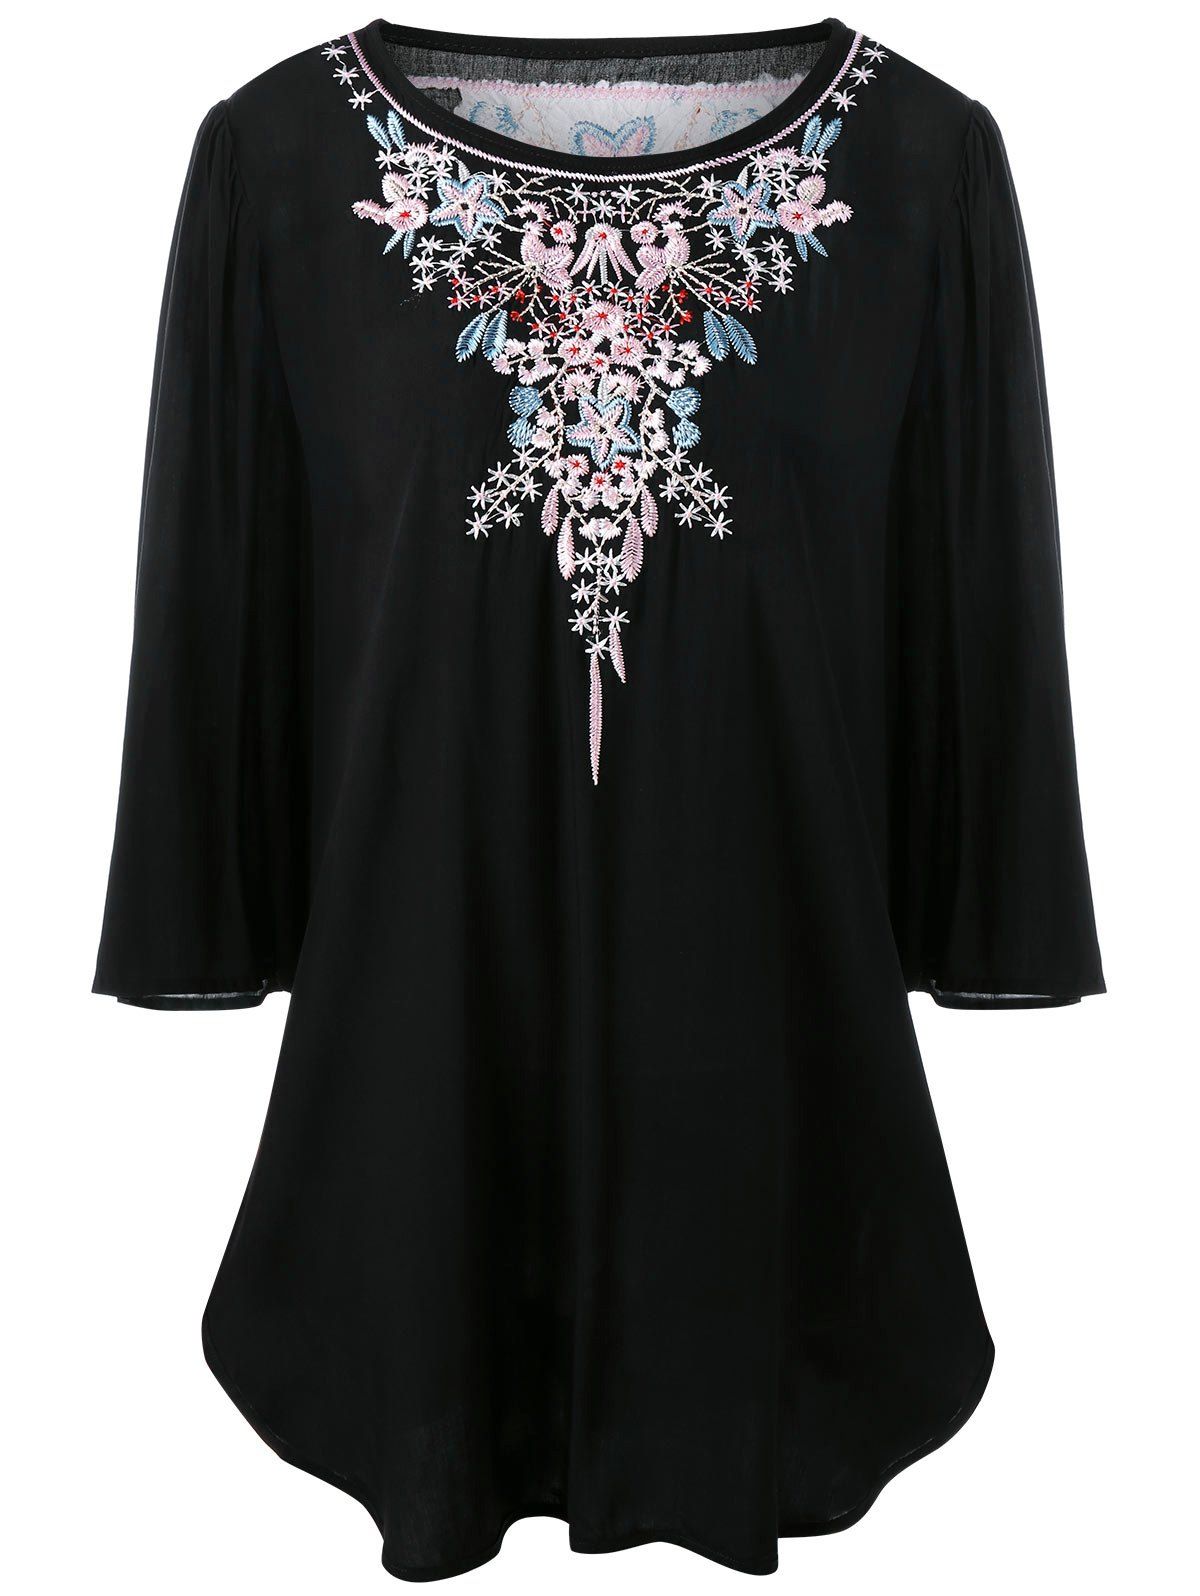 [41% OFF] 2021 Plus Size Floral Embroidered Long Dressy Top In BLACK ...